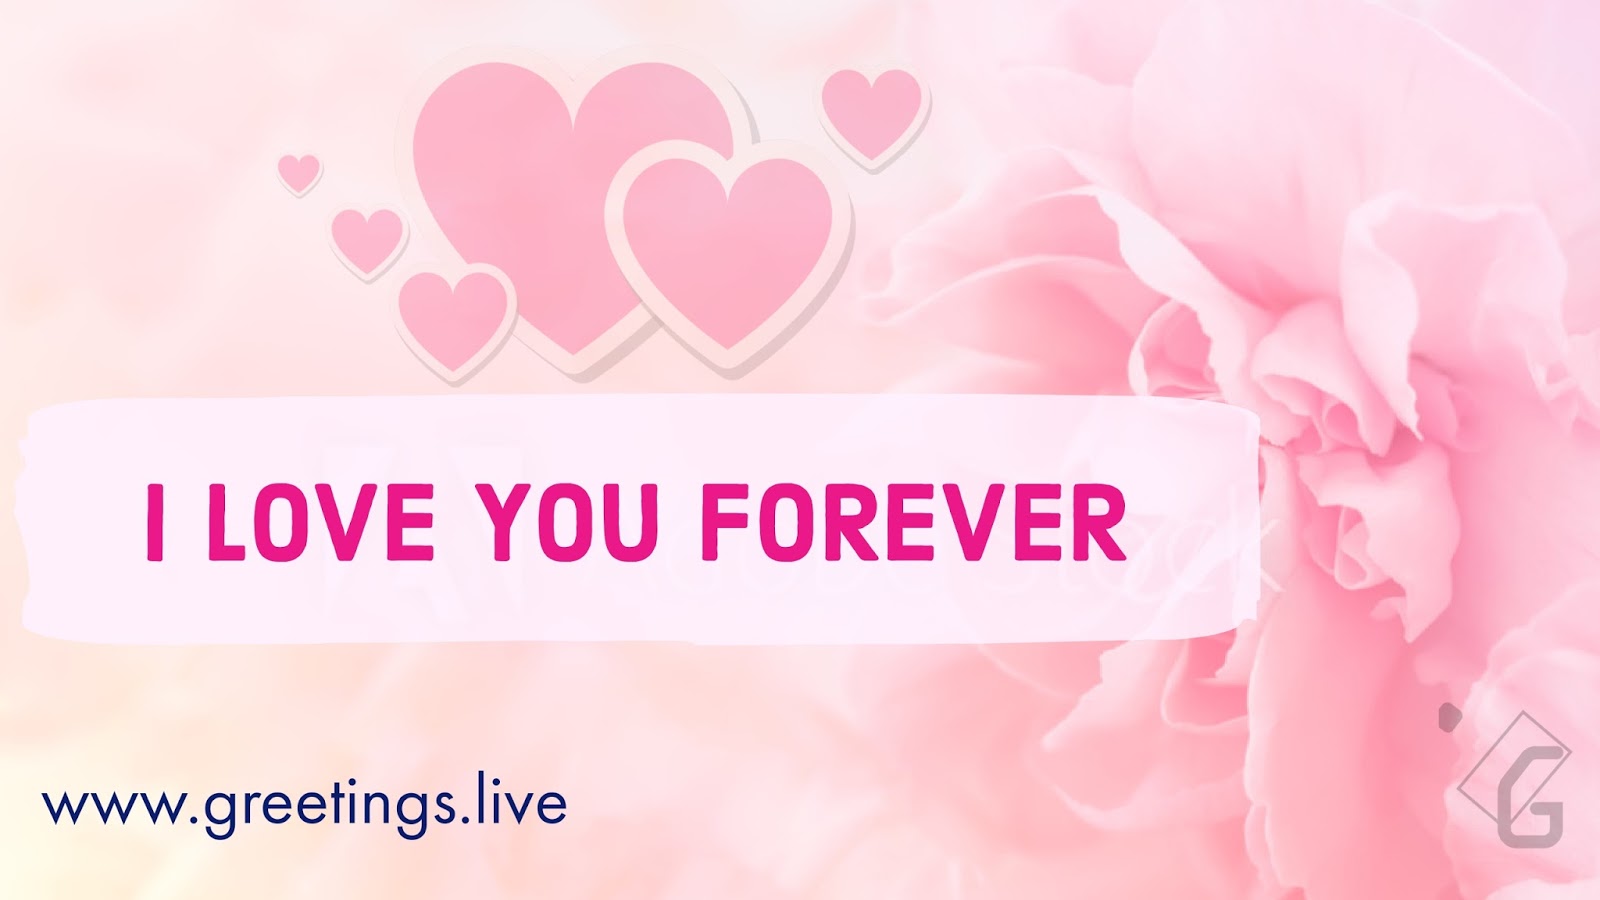 Greetings Live Free Daily Greetings Pictures Festival Gif Images I Love You Forever Life Long Greetings Live